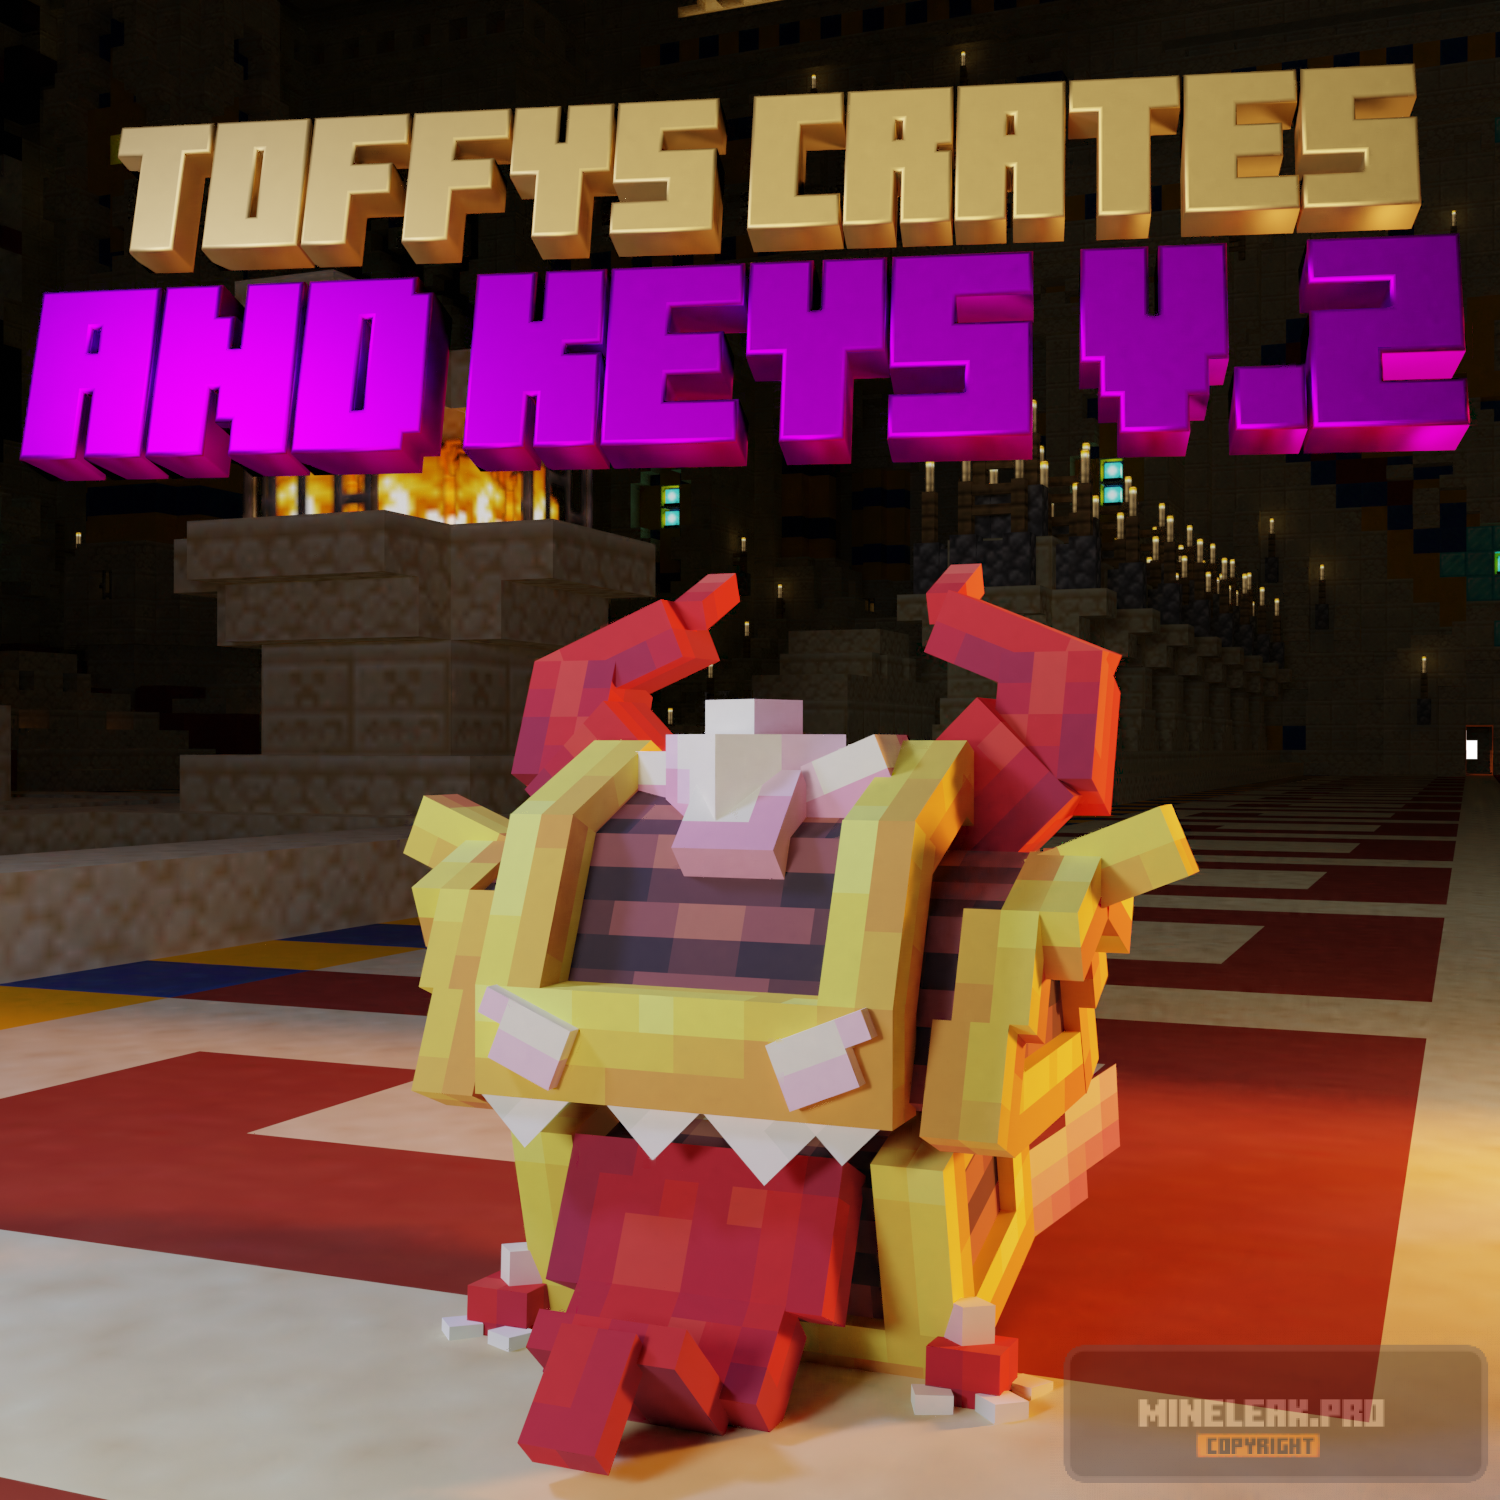 Toffys-Crates-And-Keys-Featured-2.png